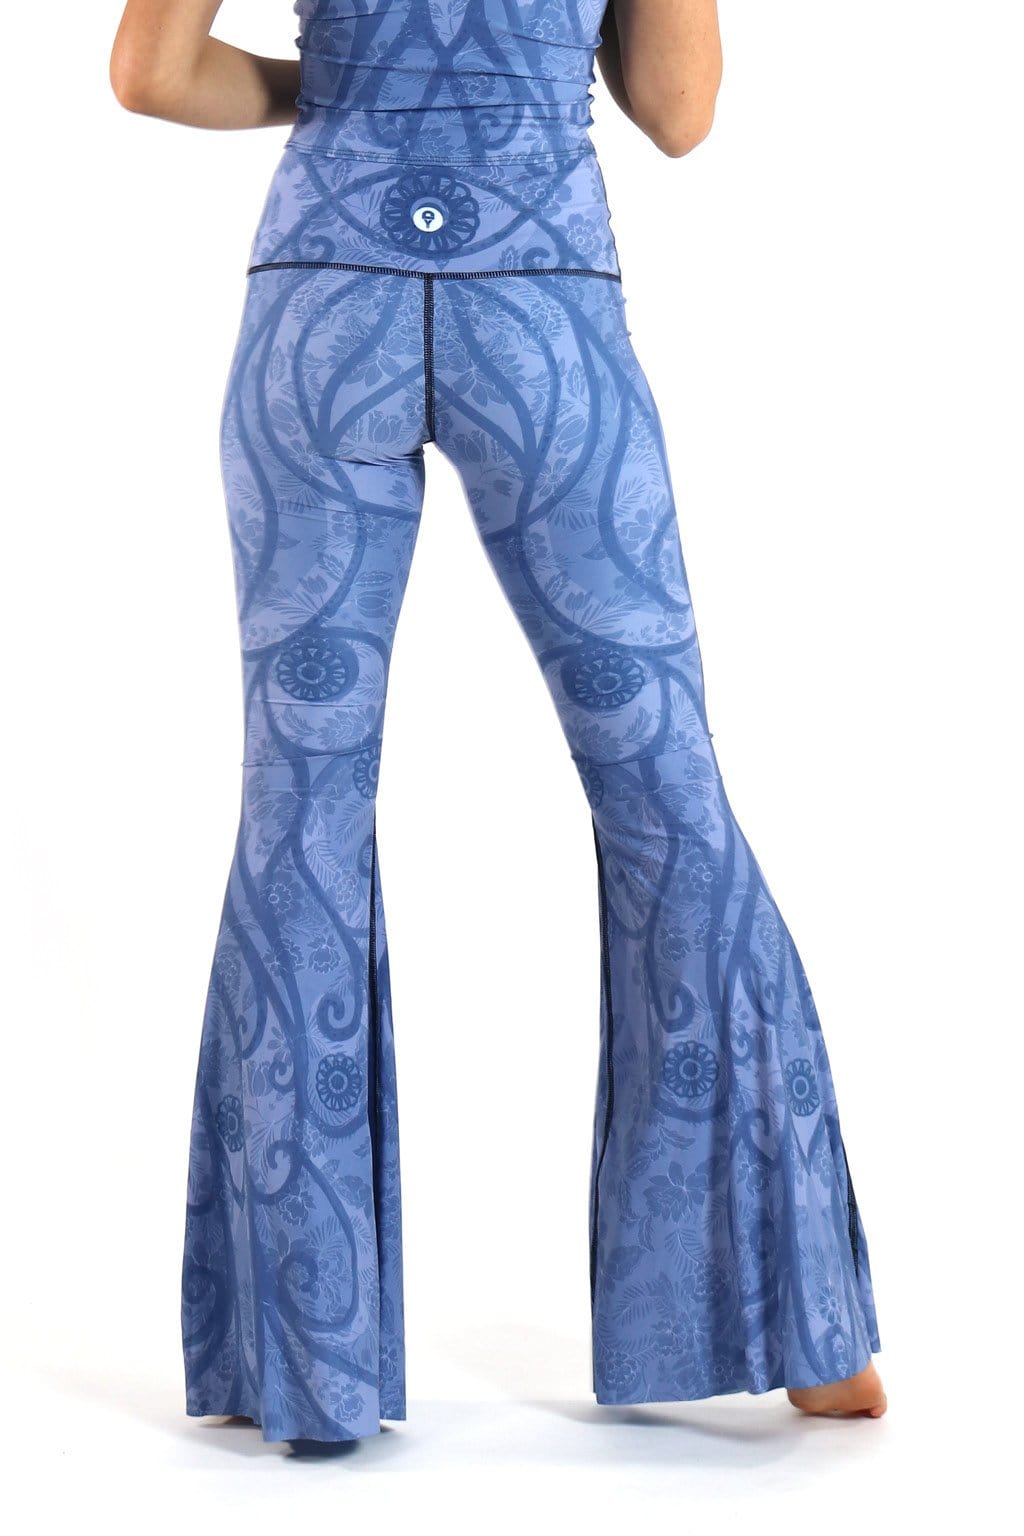 Peaceful Warrior Printed Bell Bottoms Close Up